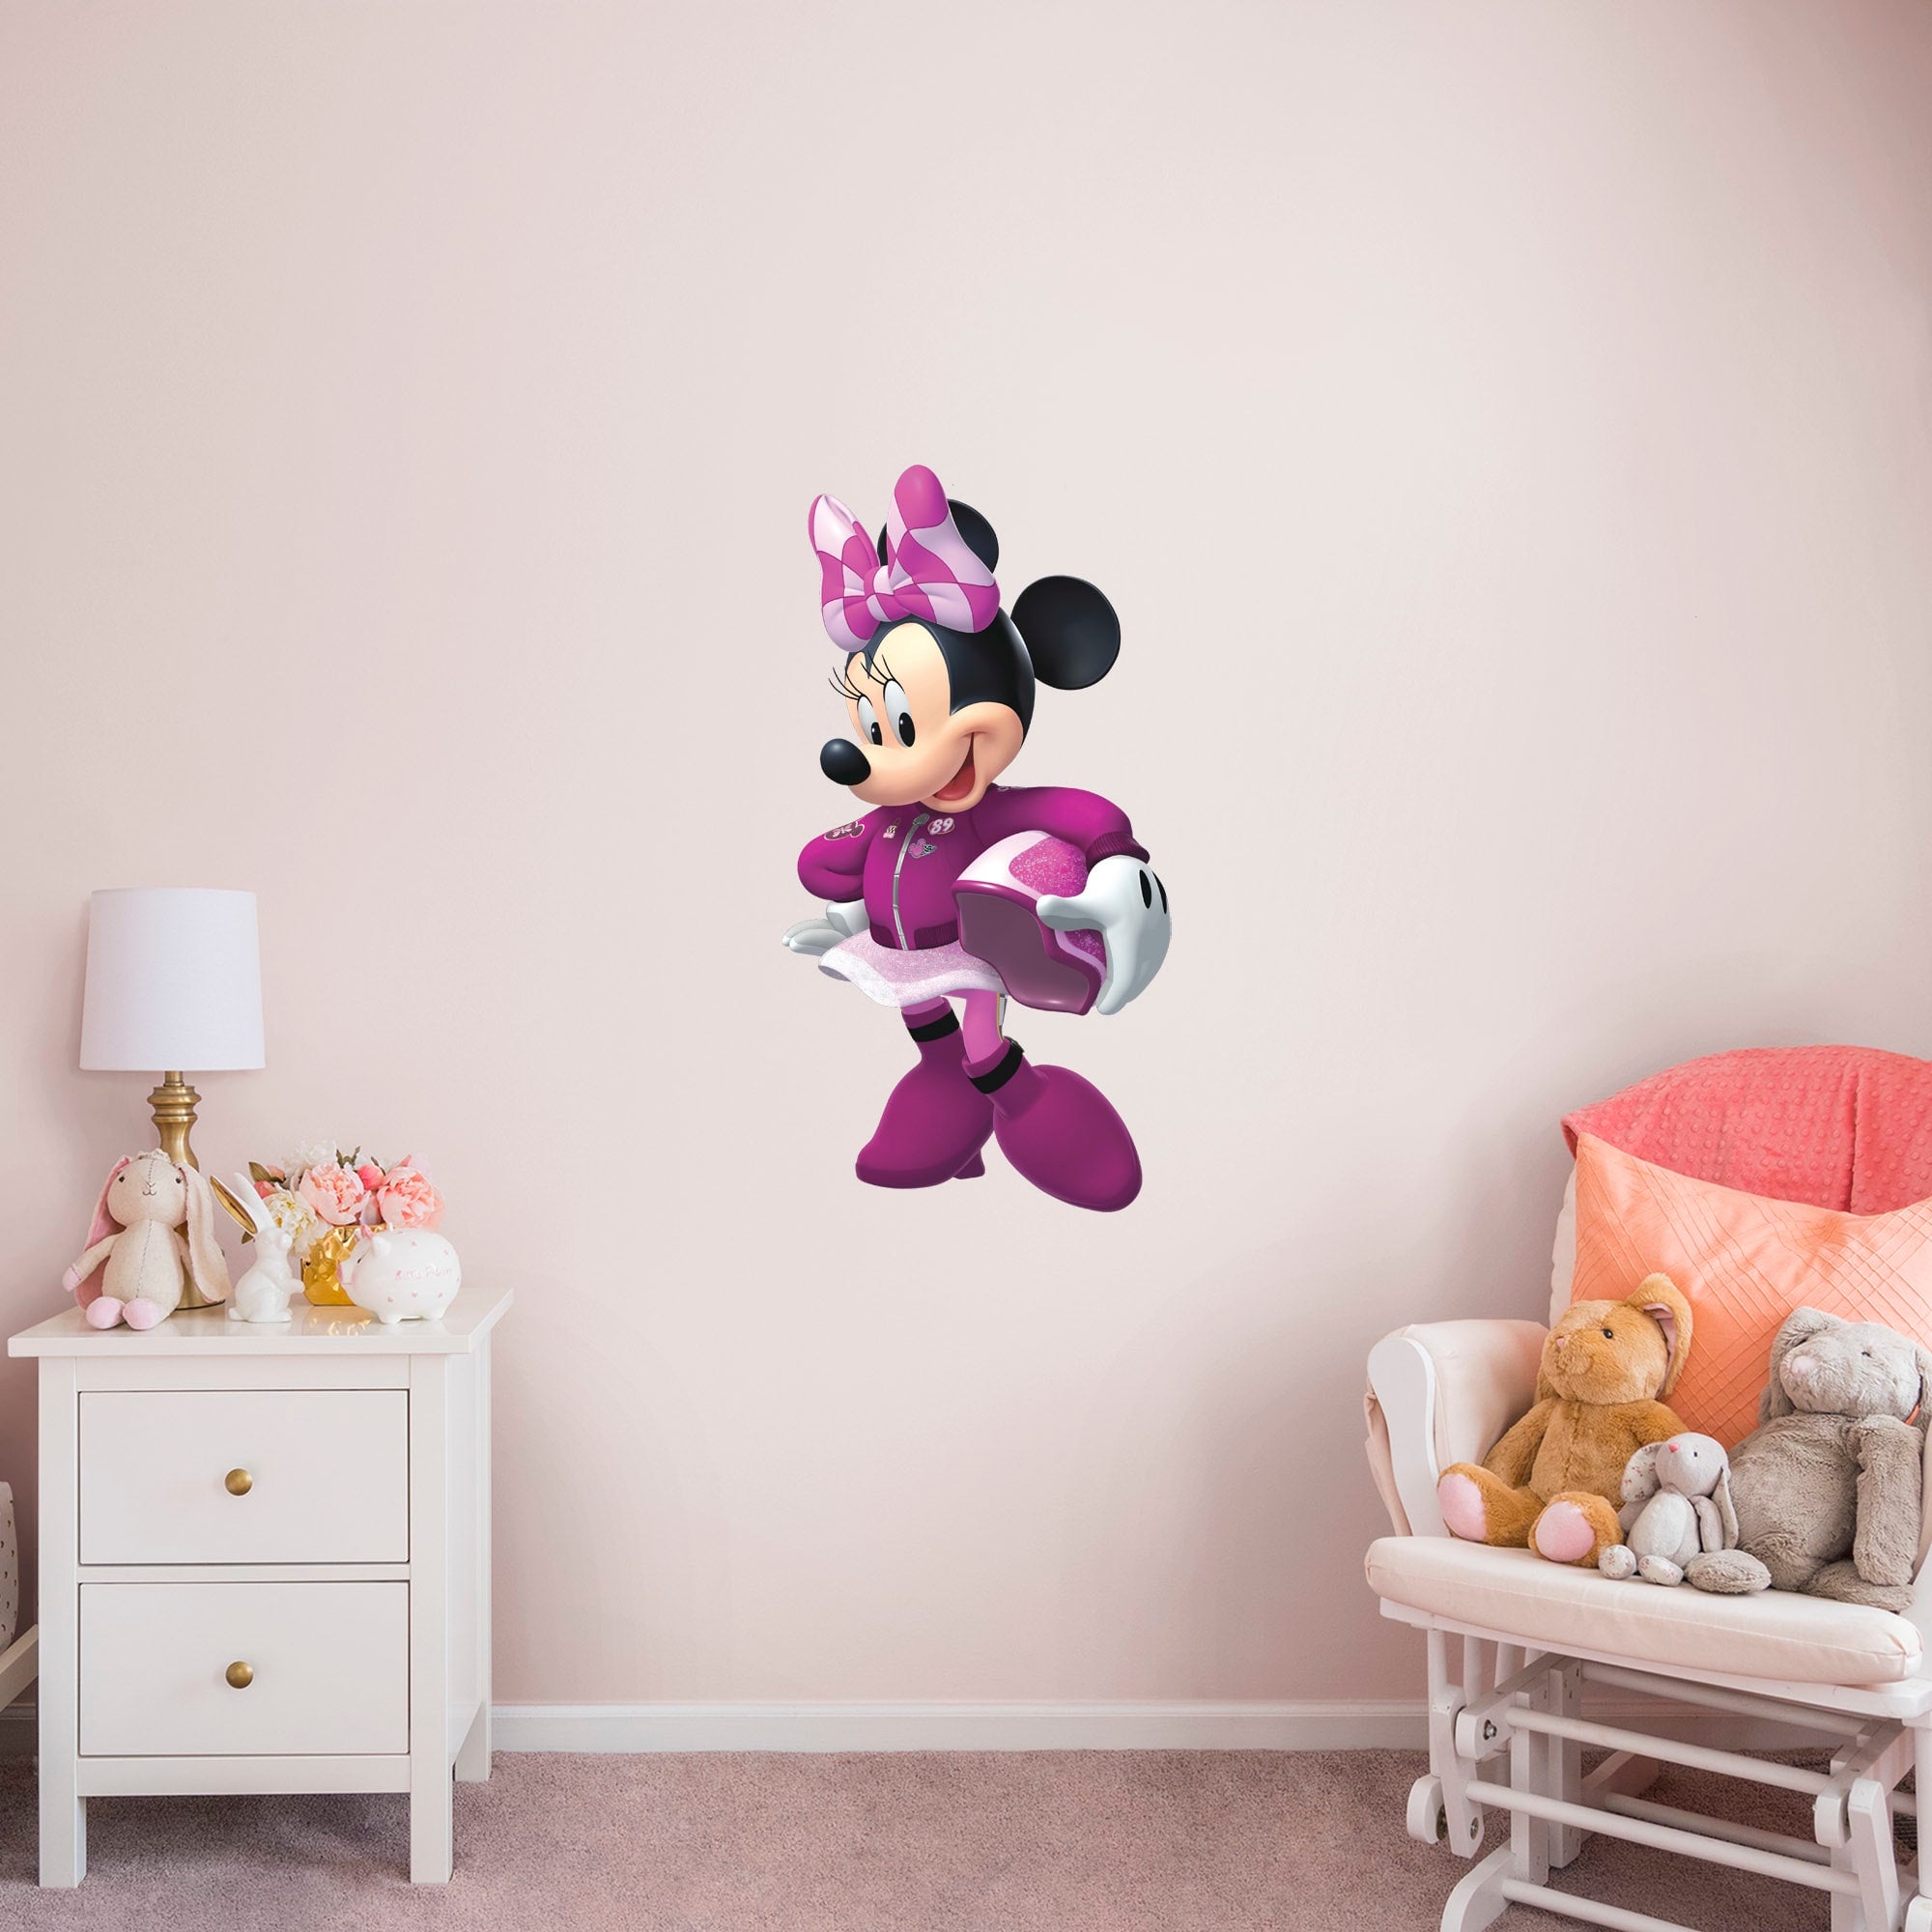 Mickey and the Roadster Racers: Minnie Mouse - Officially Licensed Disney Removable Wall Decal XL by Fathead | Vinyl